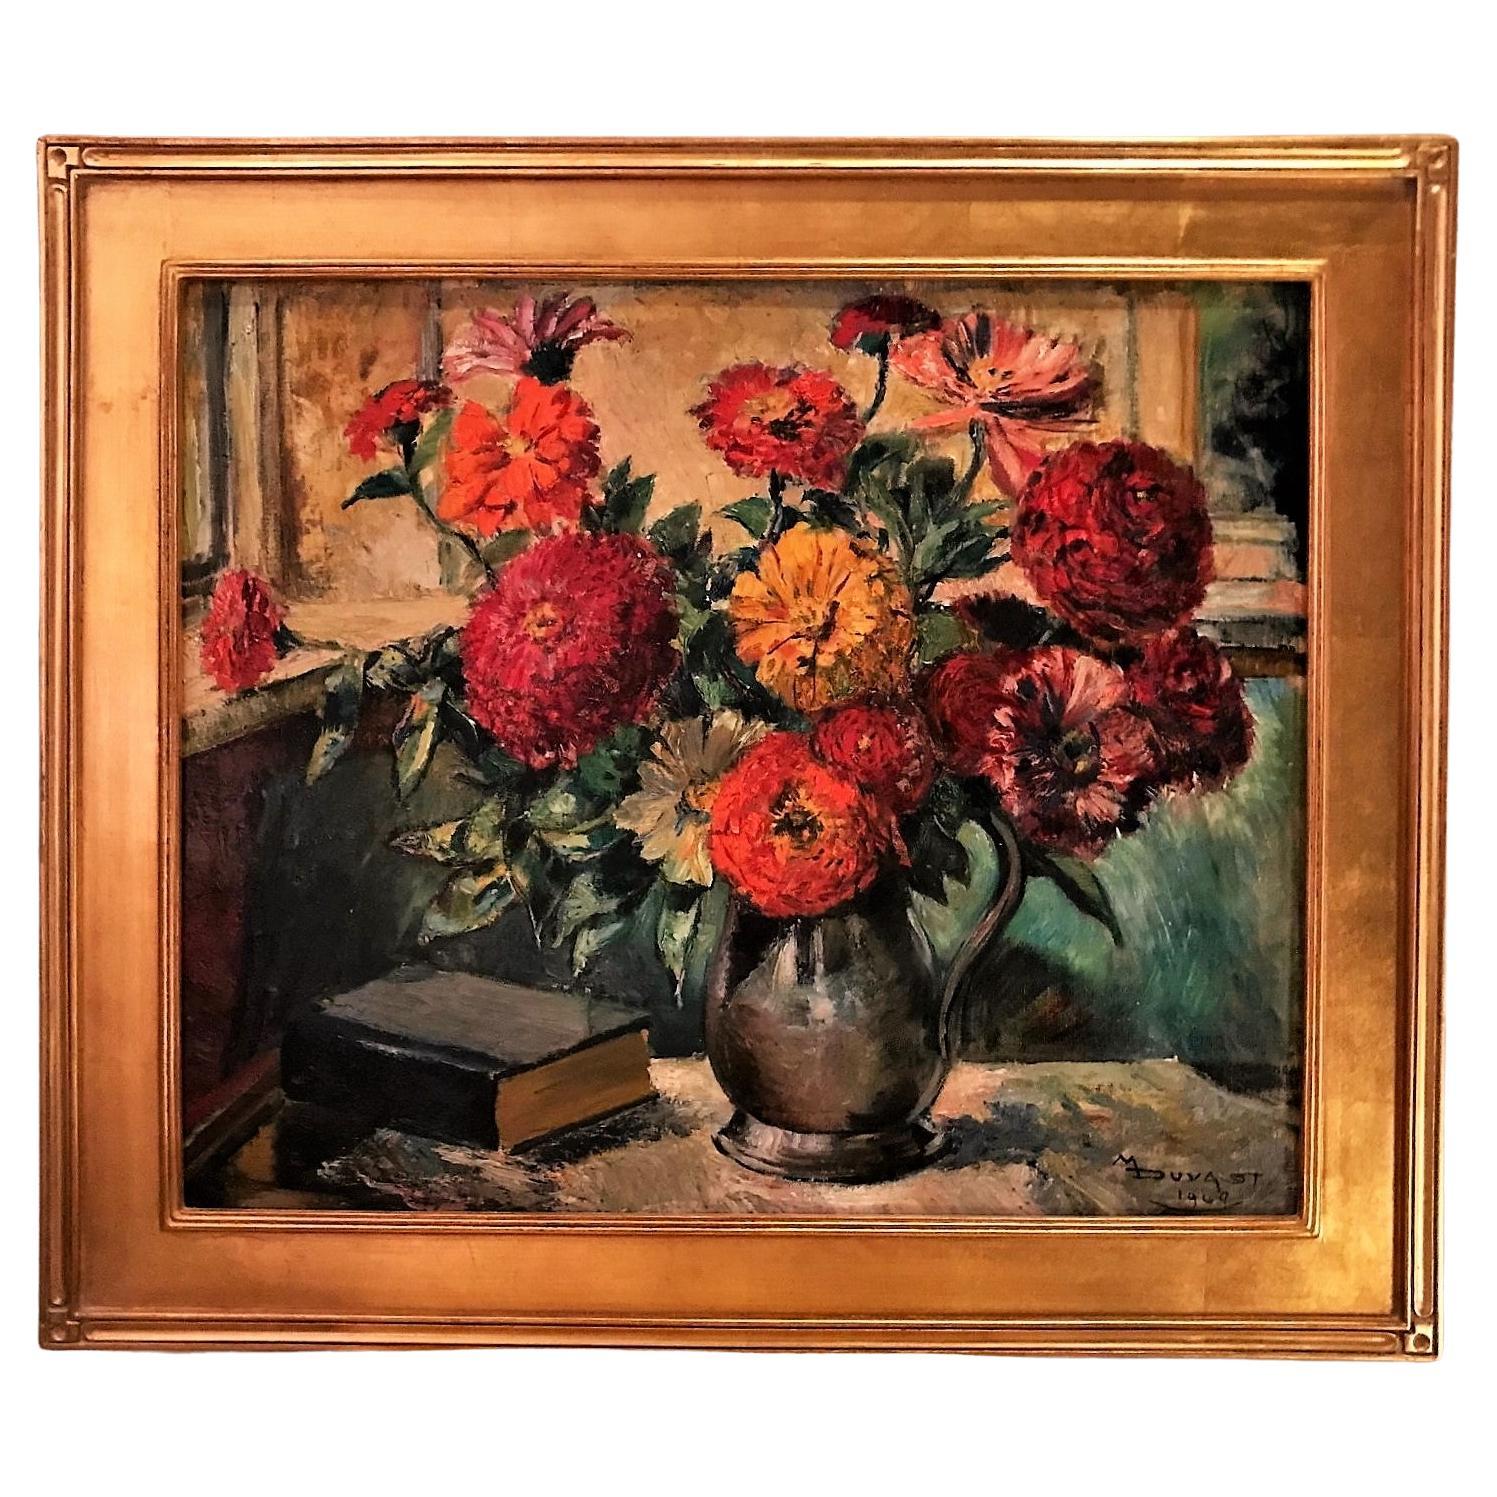 Oil on Board, "Zinnias in a Pewter Pitcher",  Maurice Duvalet (1893-1971), 1949